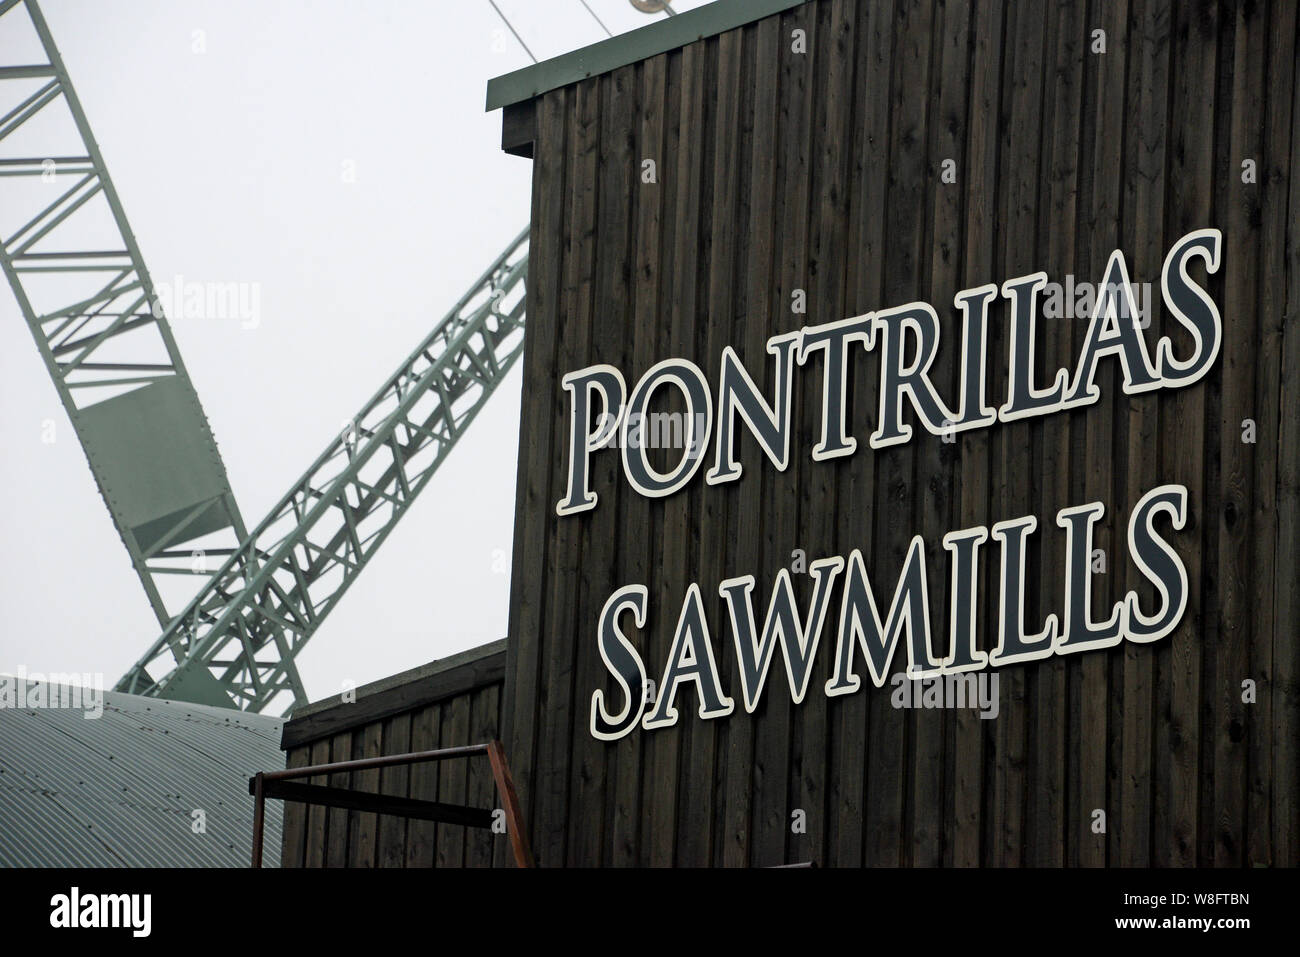 Pontrilas Sawmills where an employee died in an industrial accident. Stock Photo